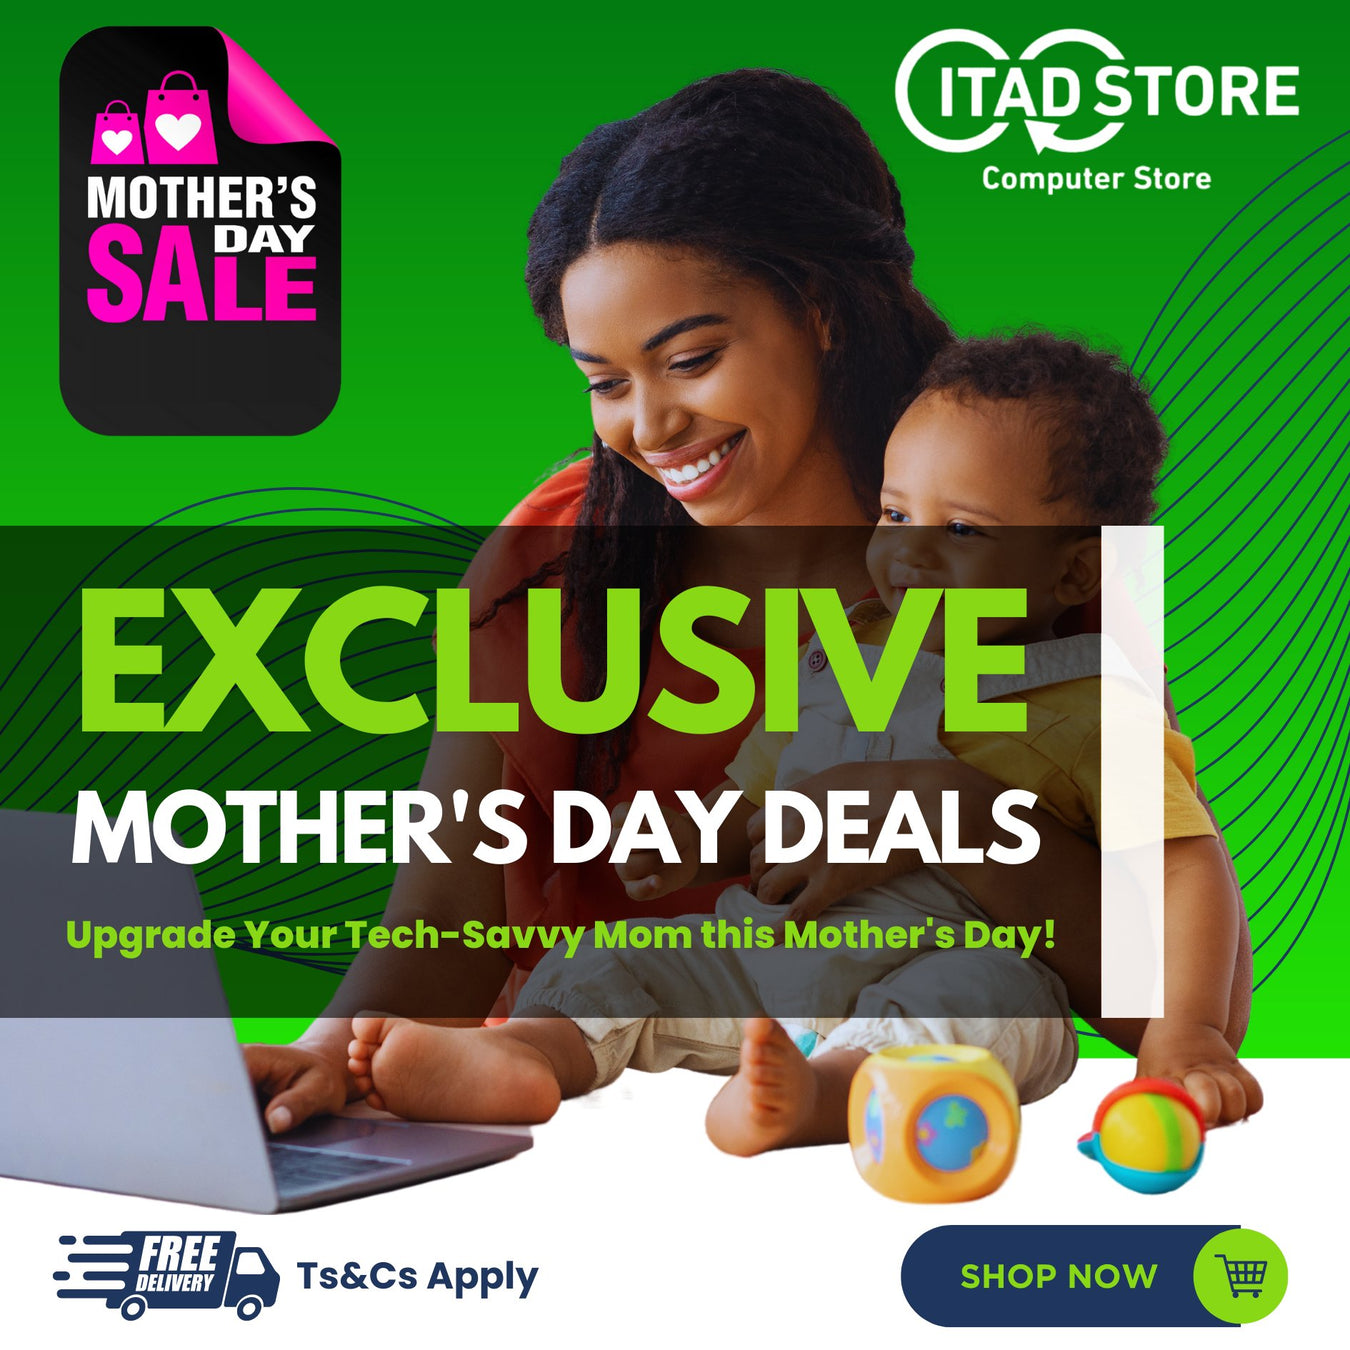 Mother's Day Deals - Itad Store